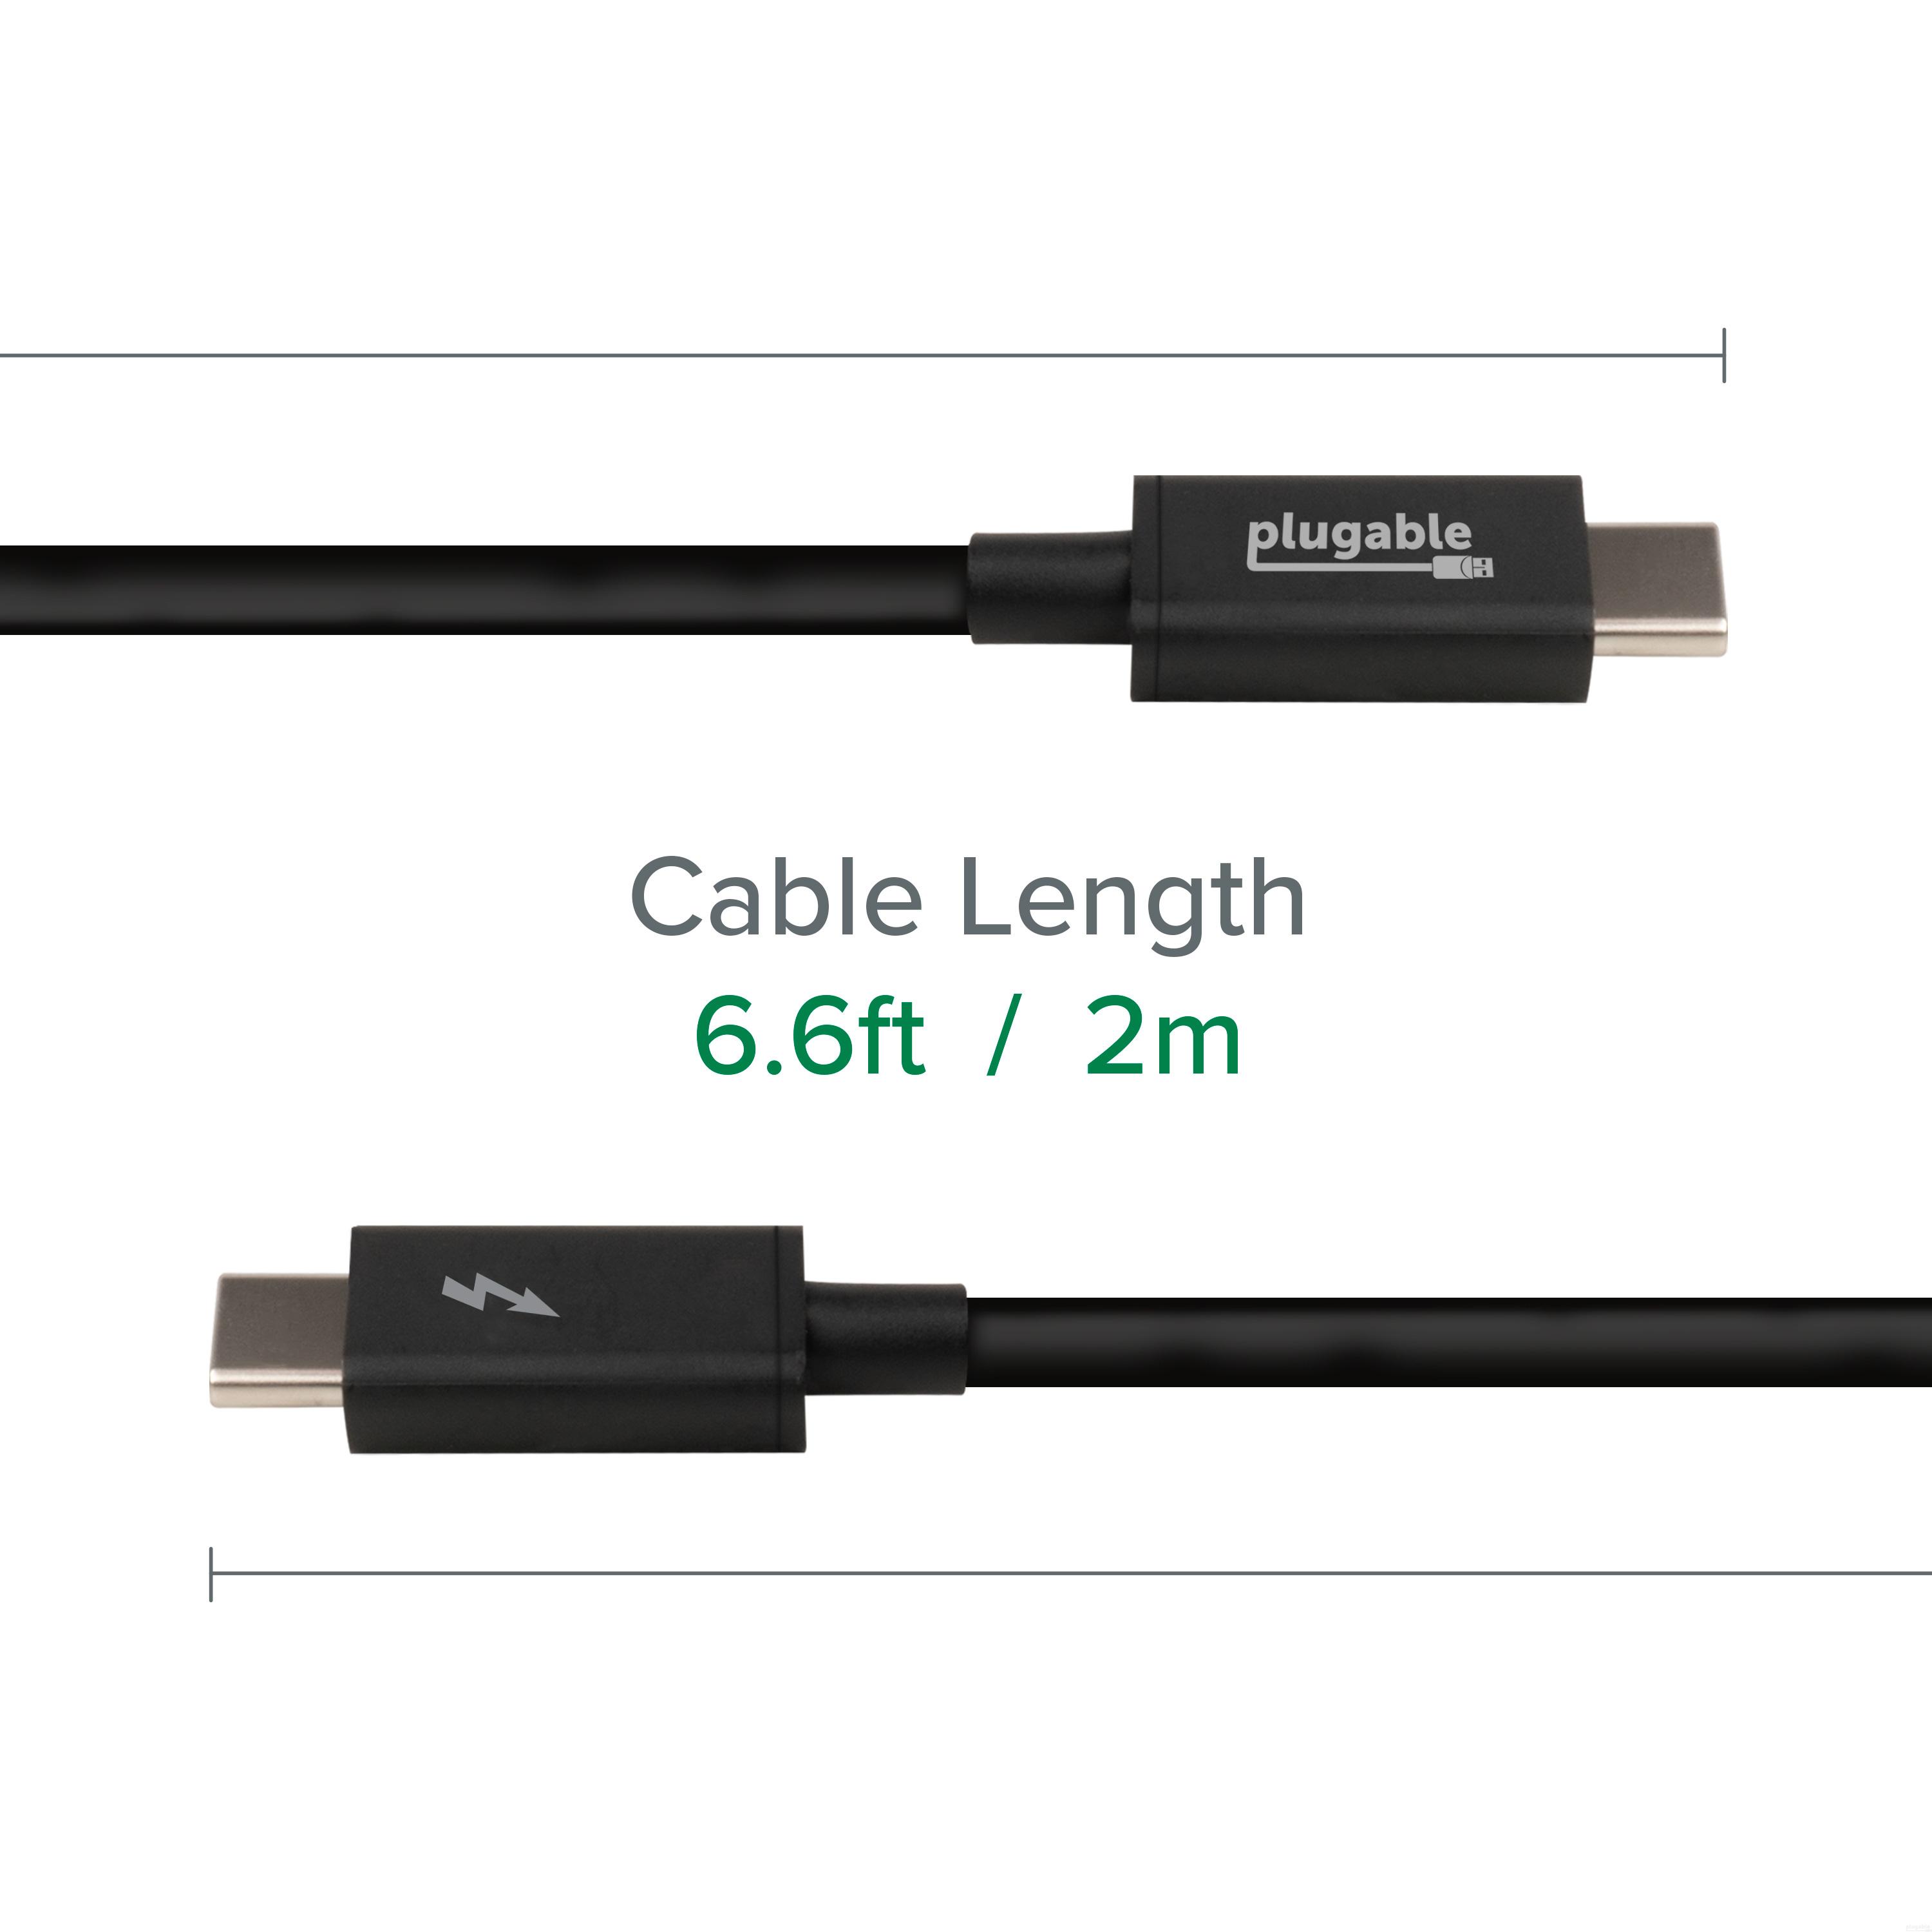 Plugable Thunderbolt 3 Cable 20Gbps Supports 100W (20V, 5A) Charging, 6.6ft / 2m USB C Compatible [Thunderbolt 3 Certified] - Driverless - image 2 of 3